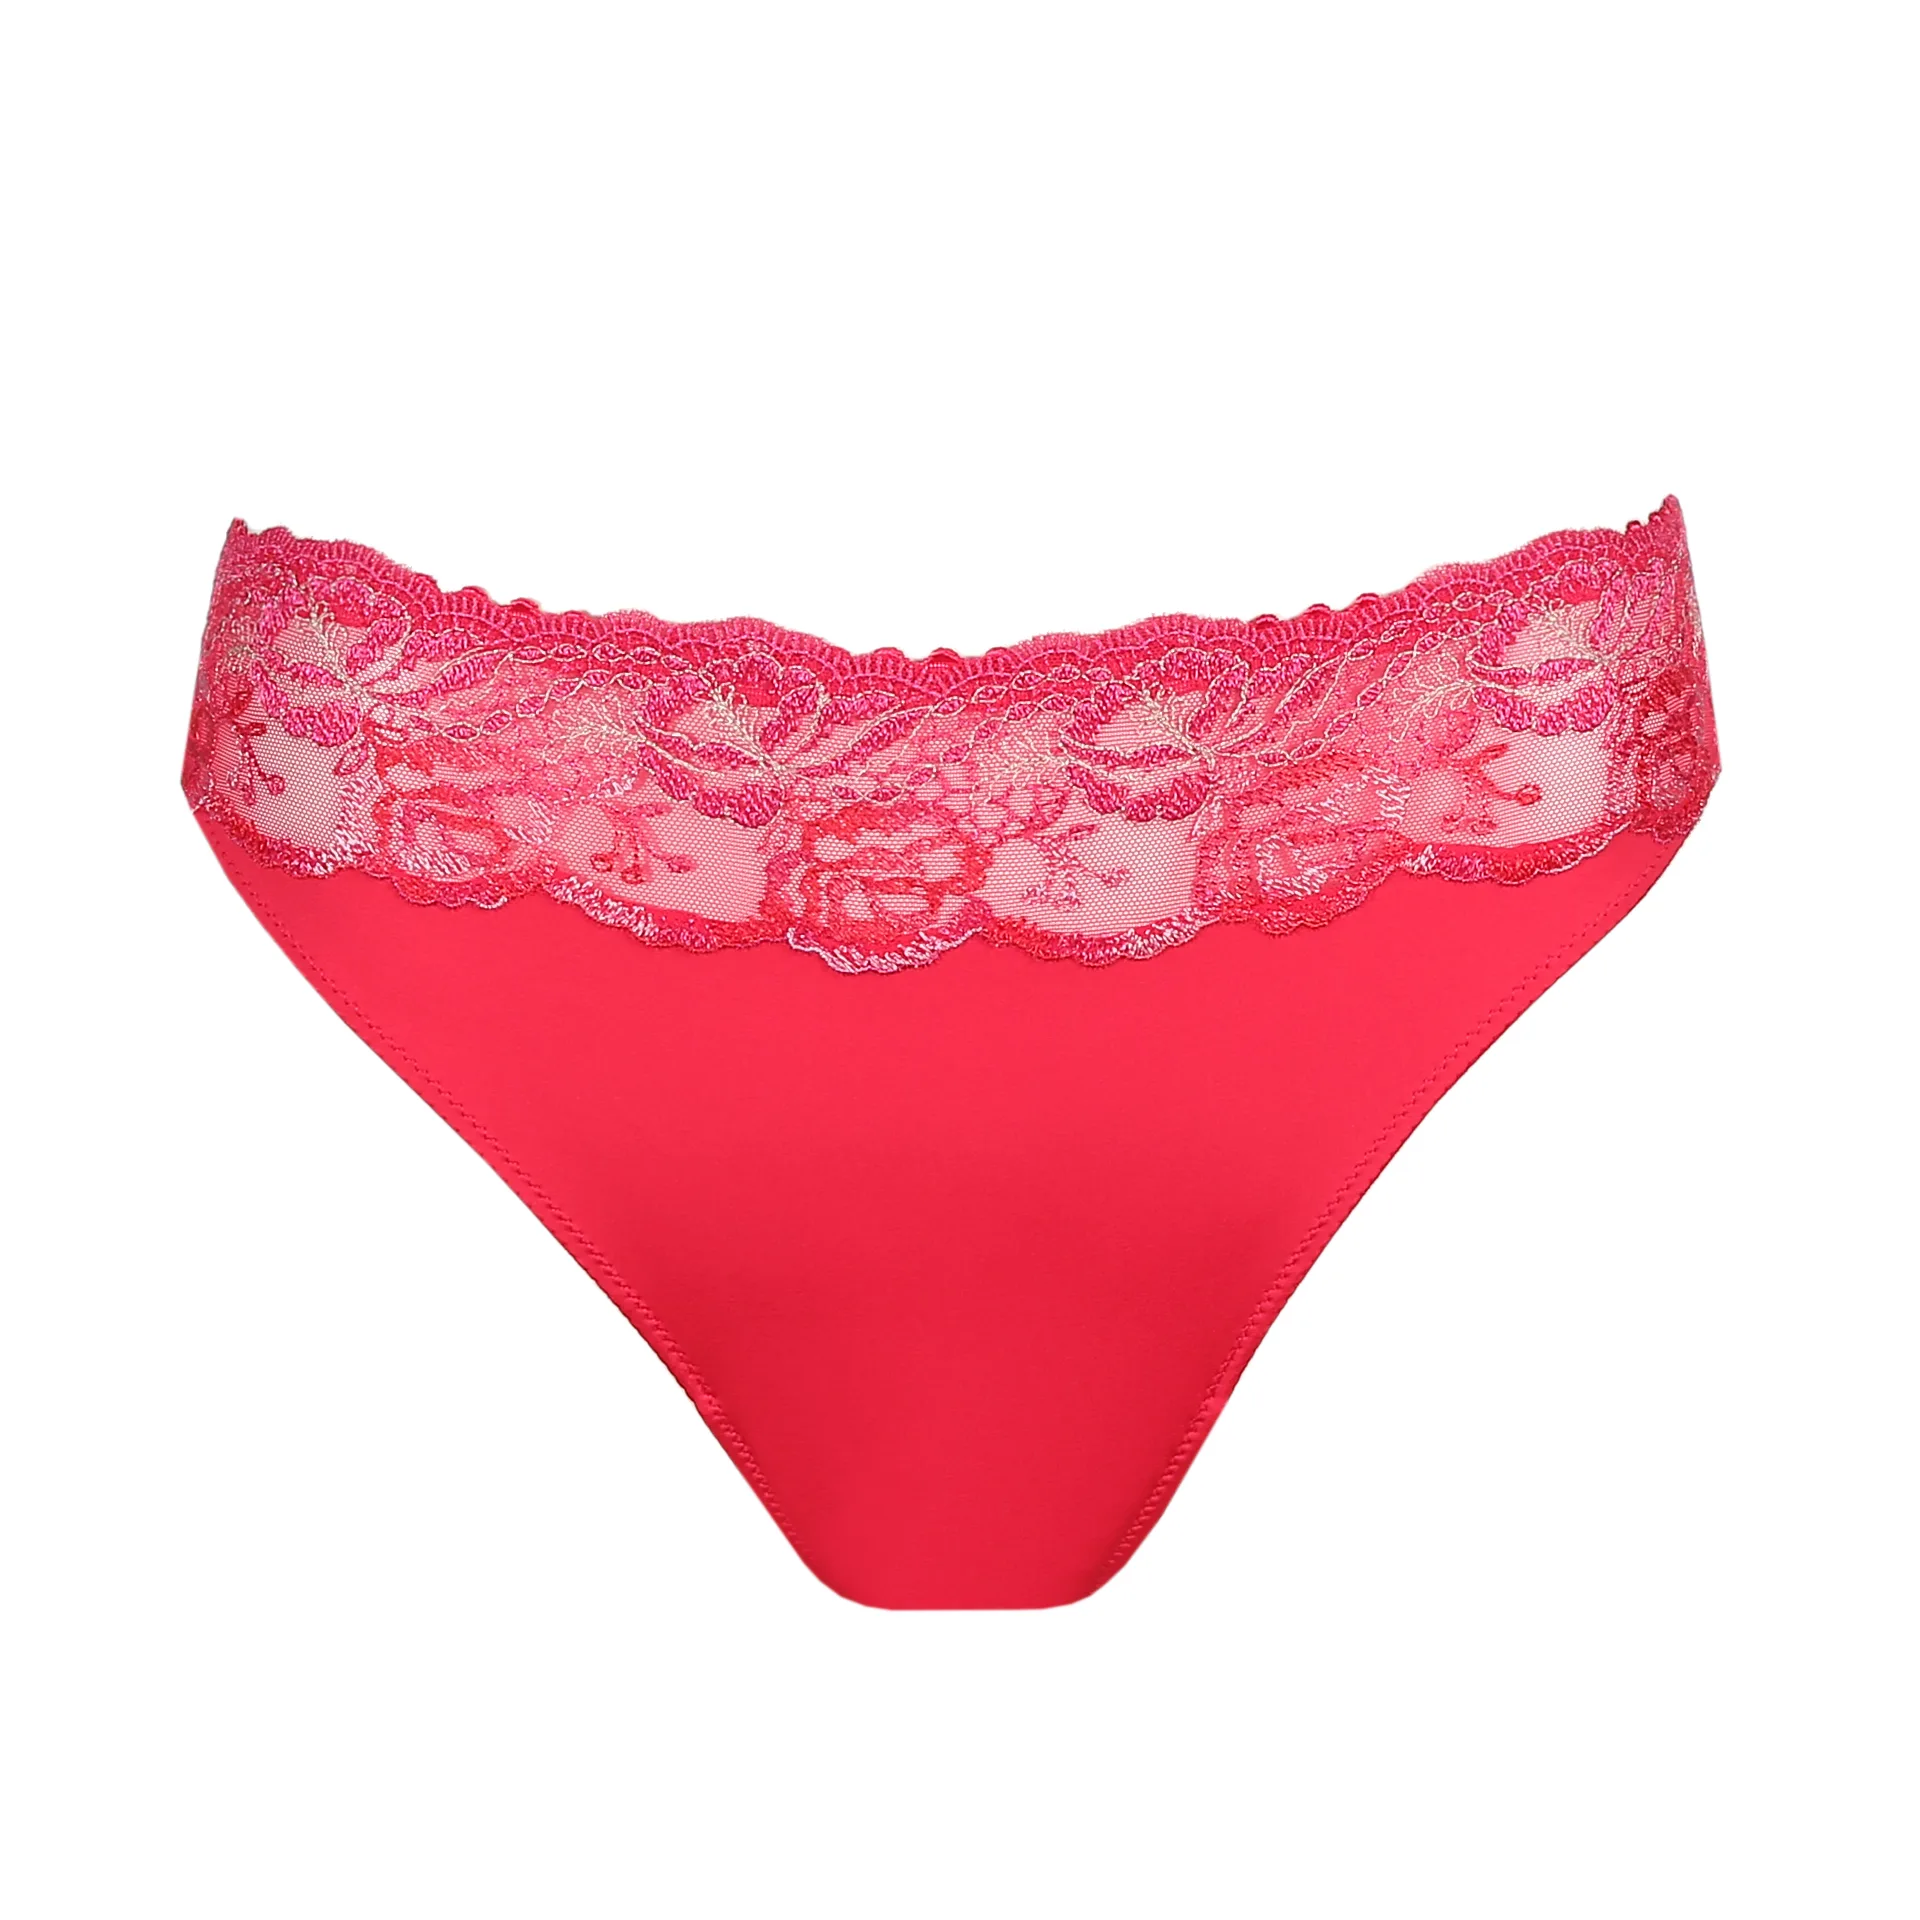 NWT VICTORIA’S SECRET PINK RED LACE PANTIES